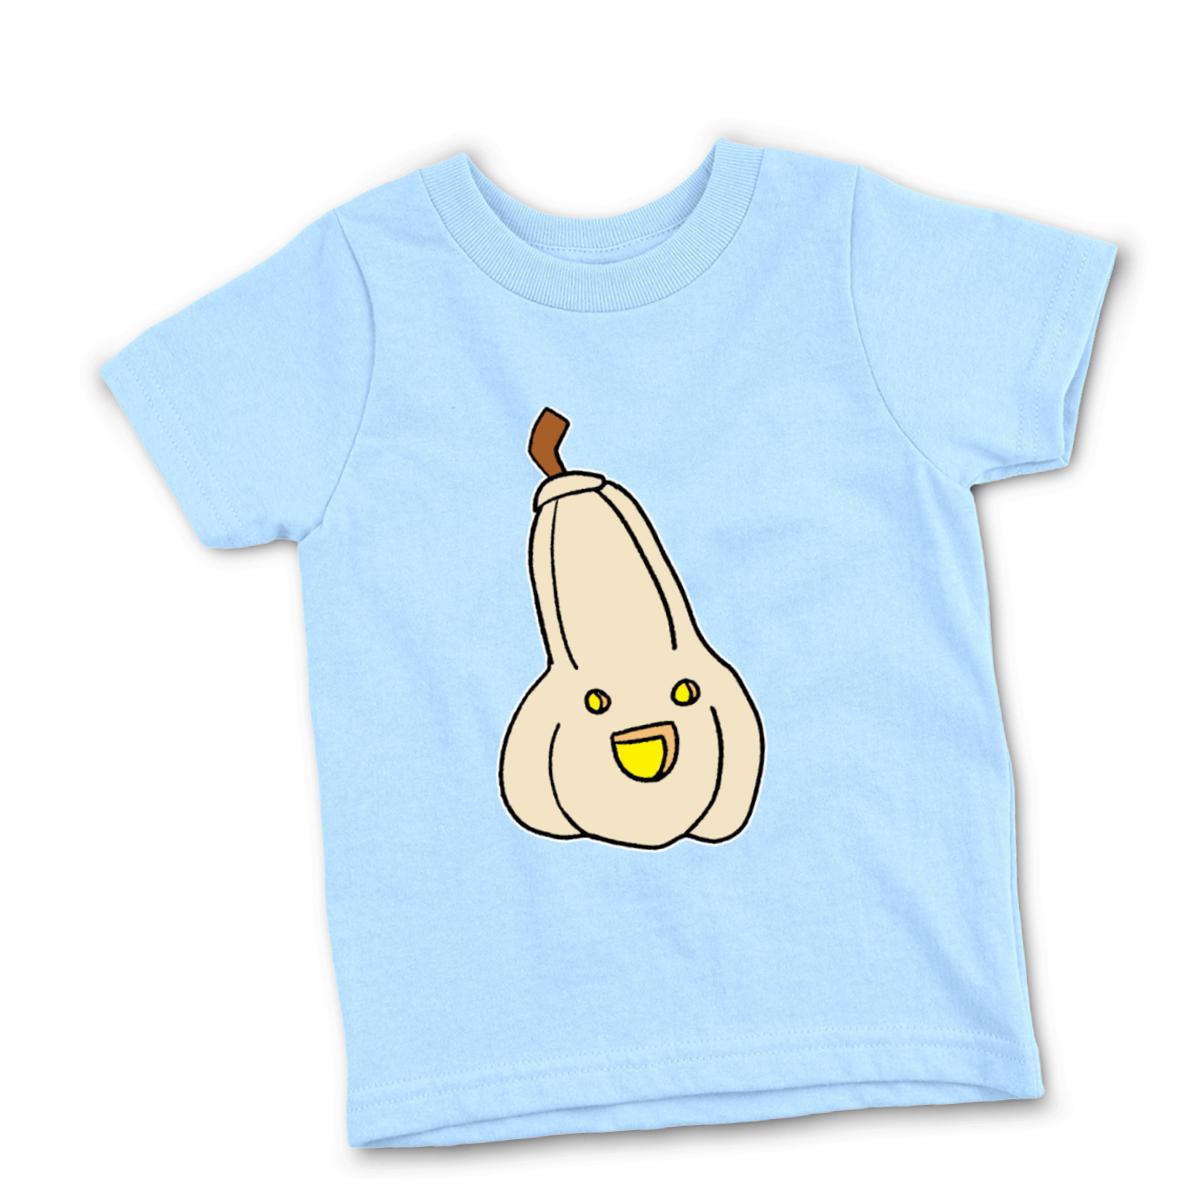 The New Guy Kid's Tee Large light-blue